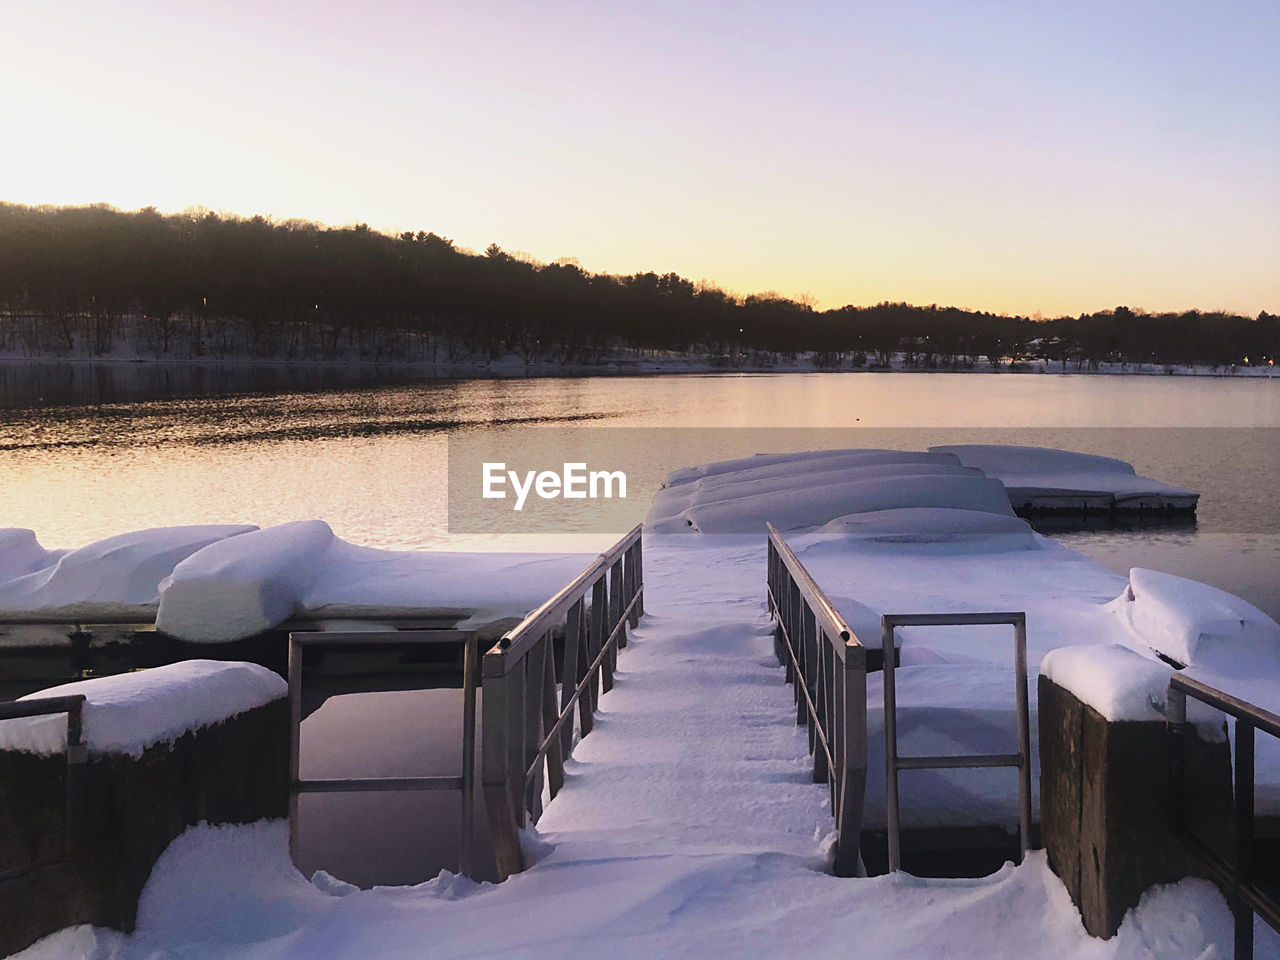 SCENIC VIEW OF SNOW COVERED LAKE AGAINST SKY AT SUNSET